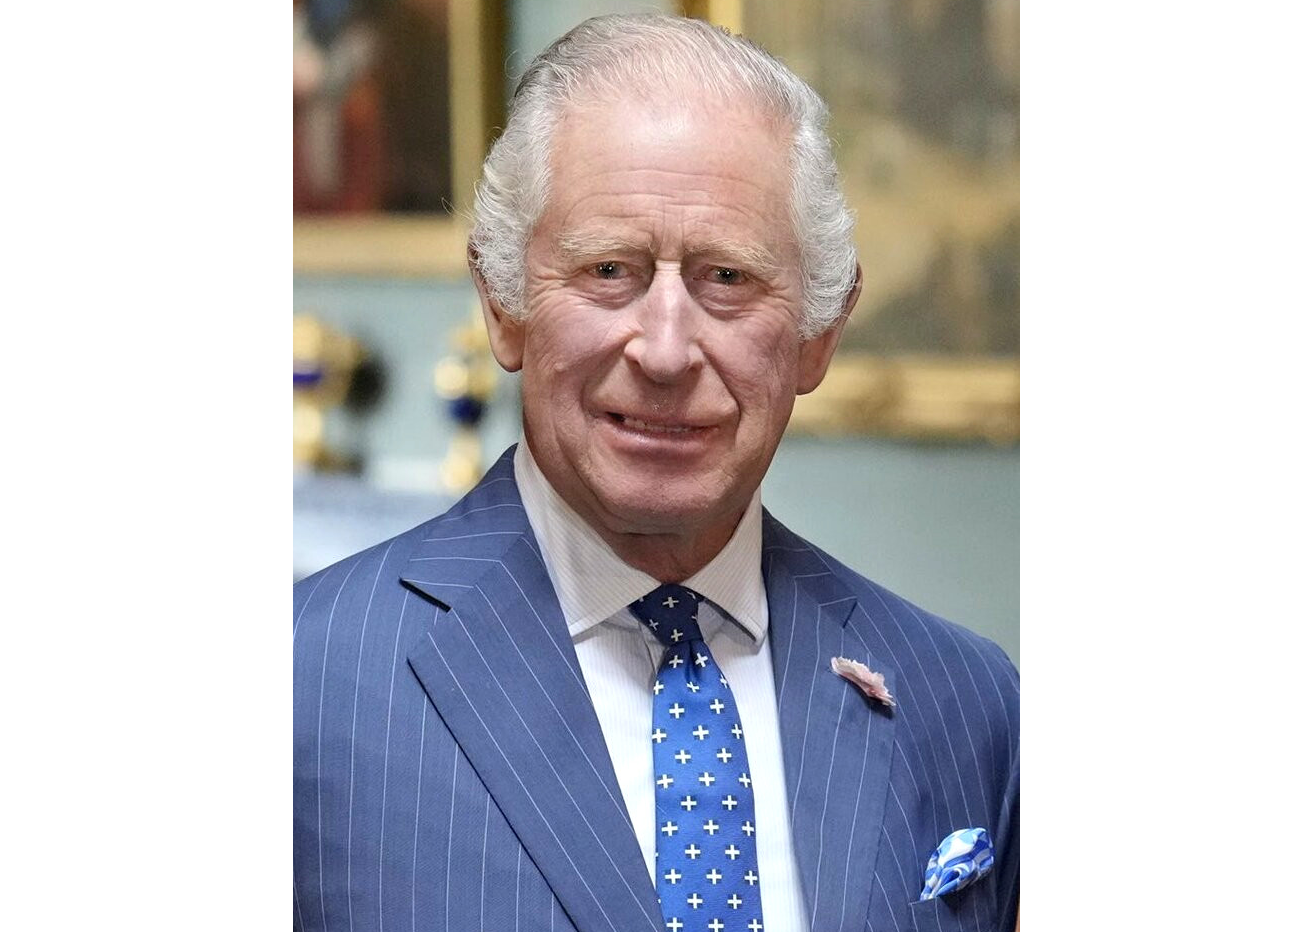 A portrait photo of King Charles III, wearing a blue pinstriped blazer and blue tie with cream repeat crosses on a white shirt.